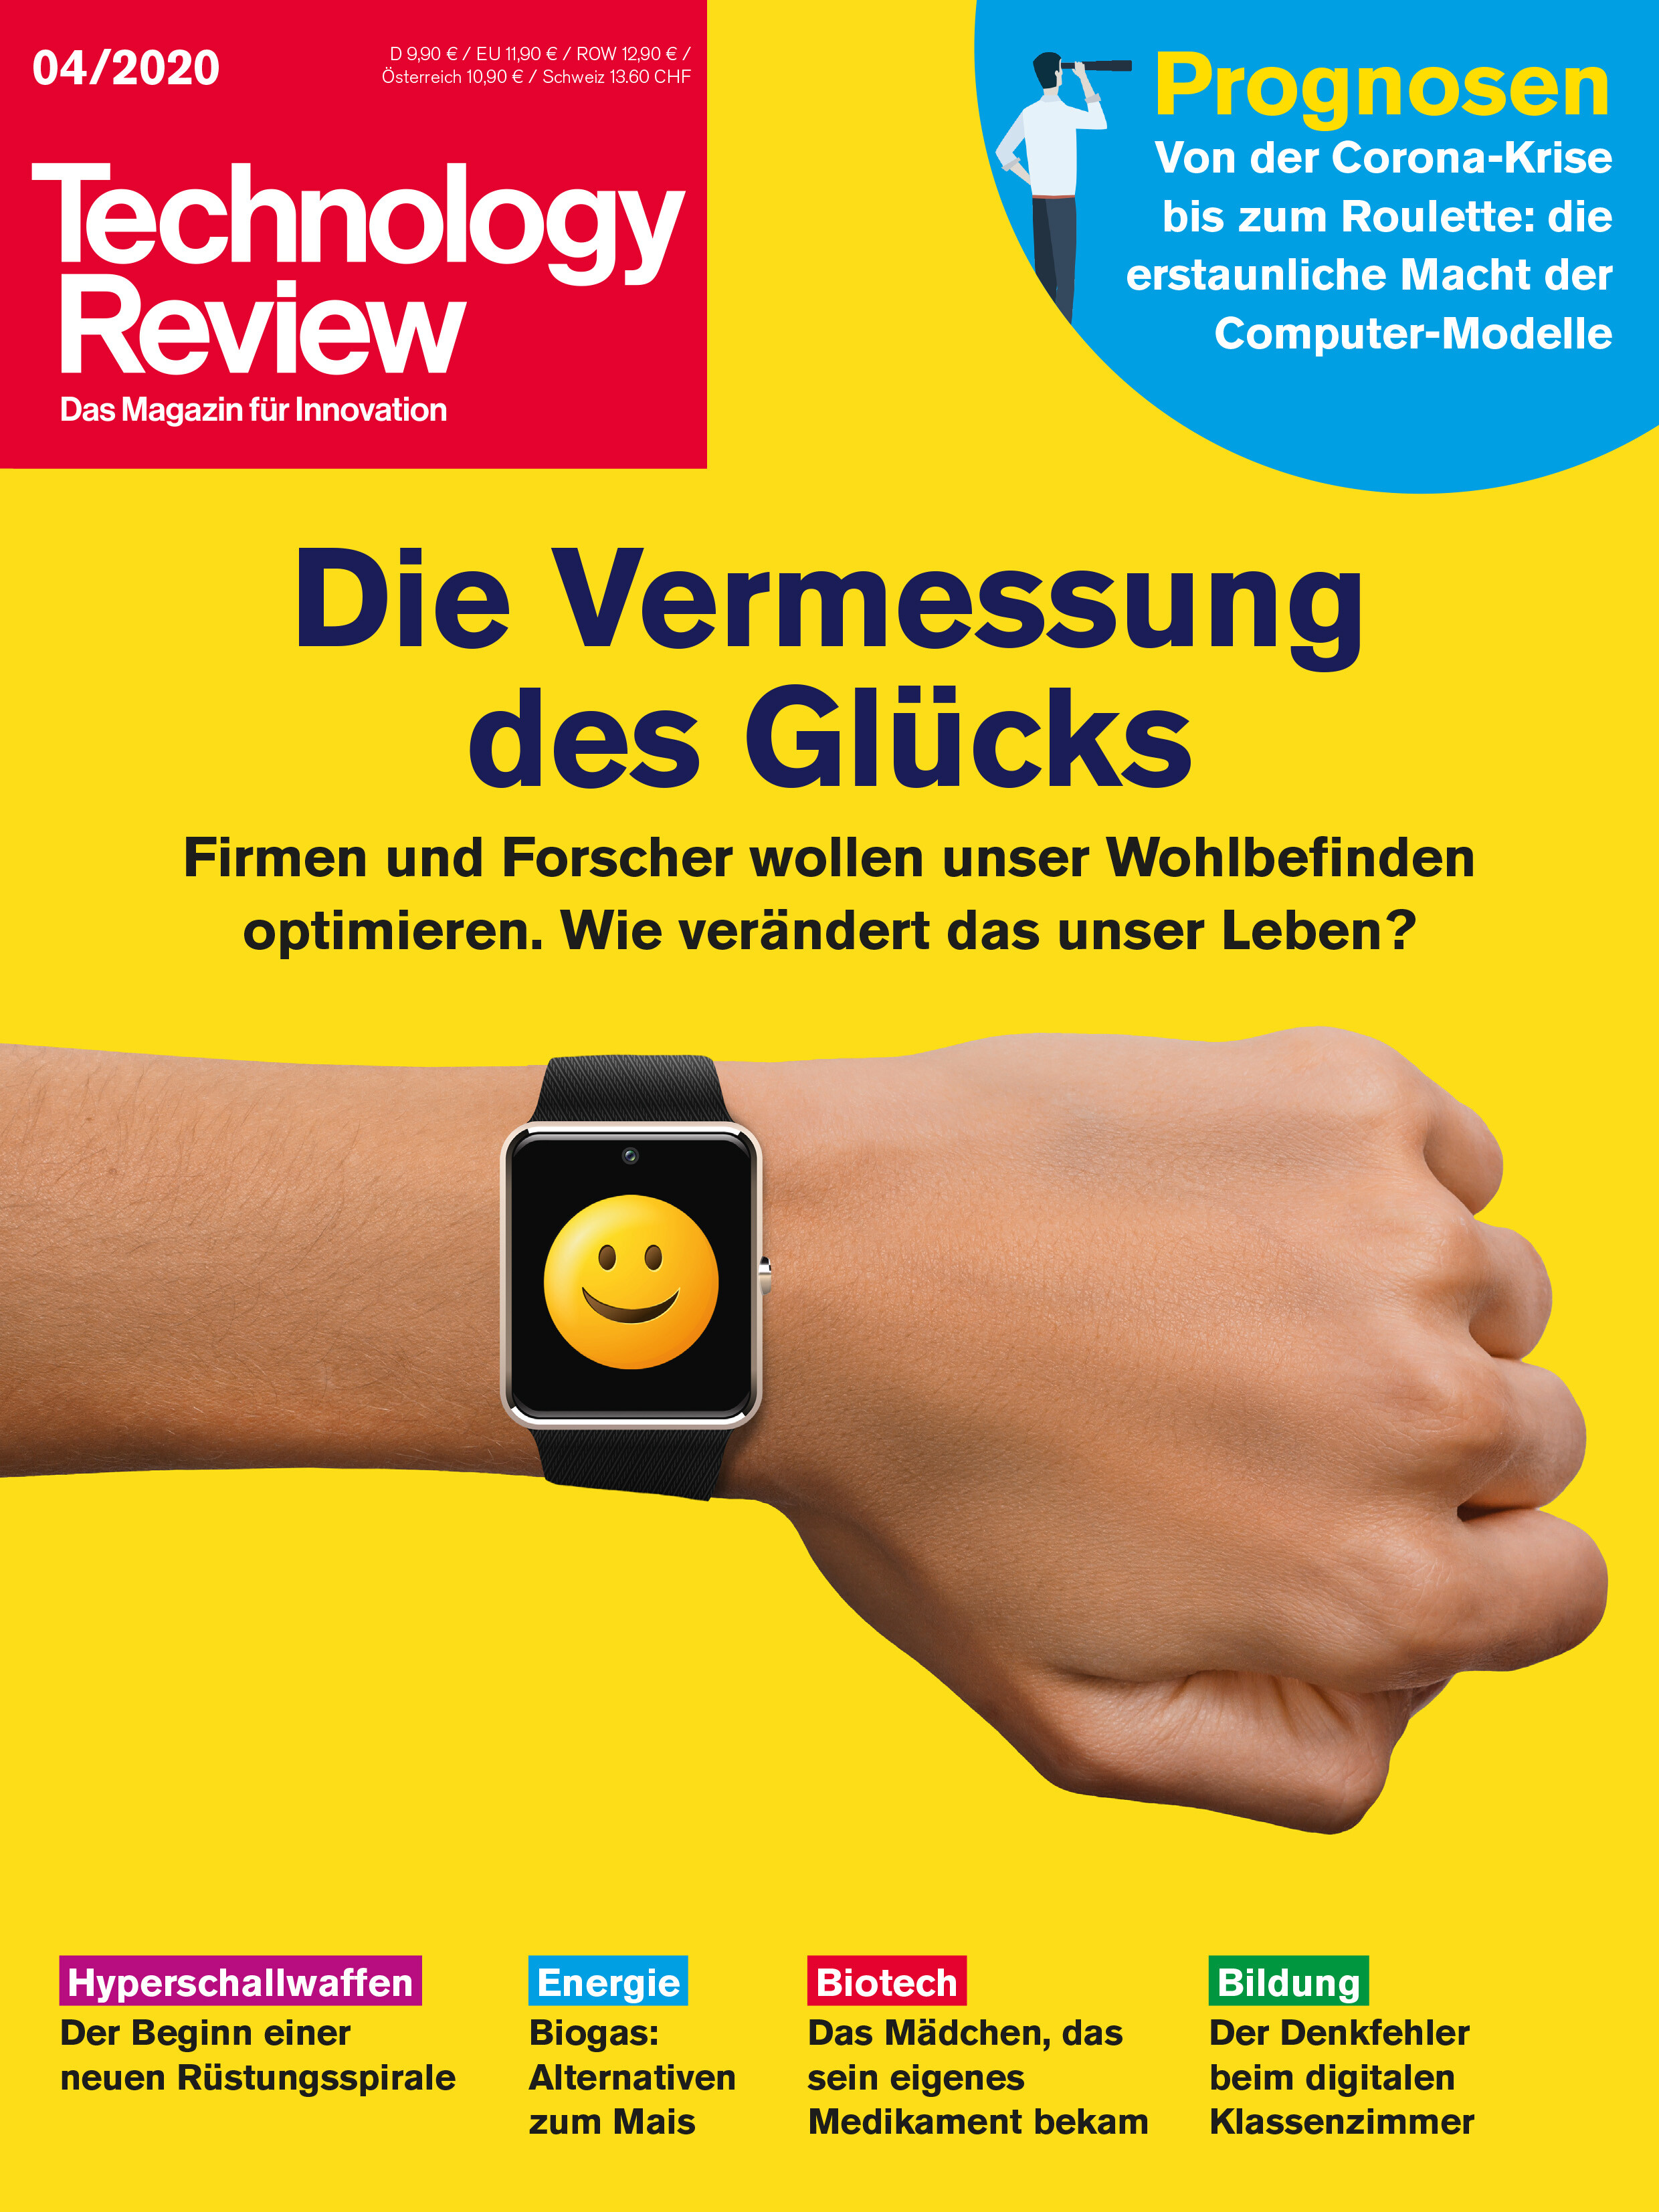 Technology Review 04/2020